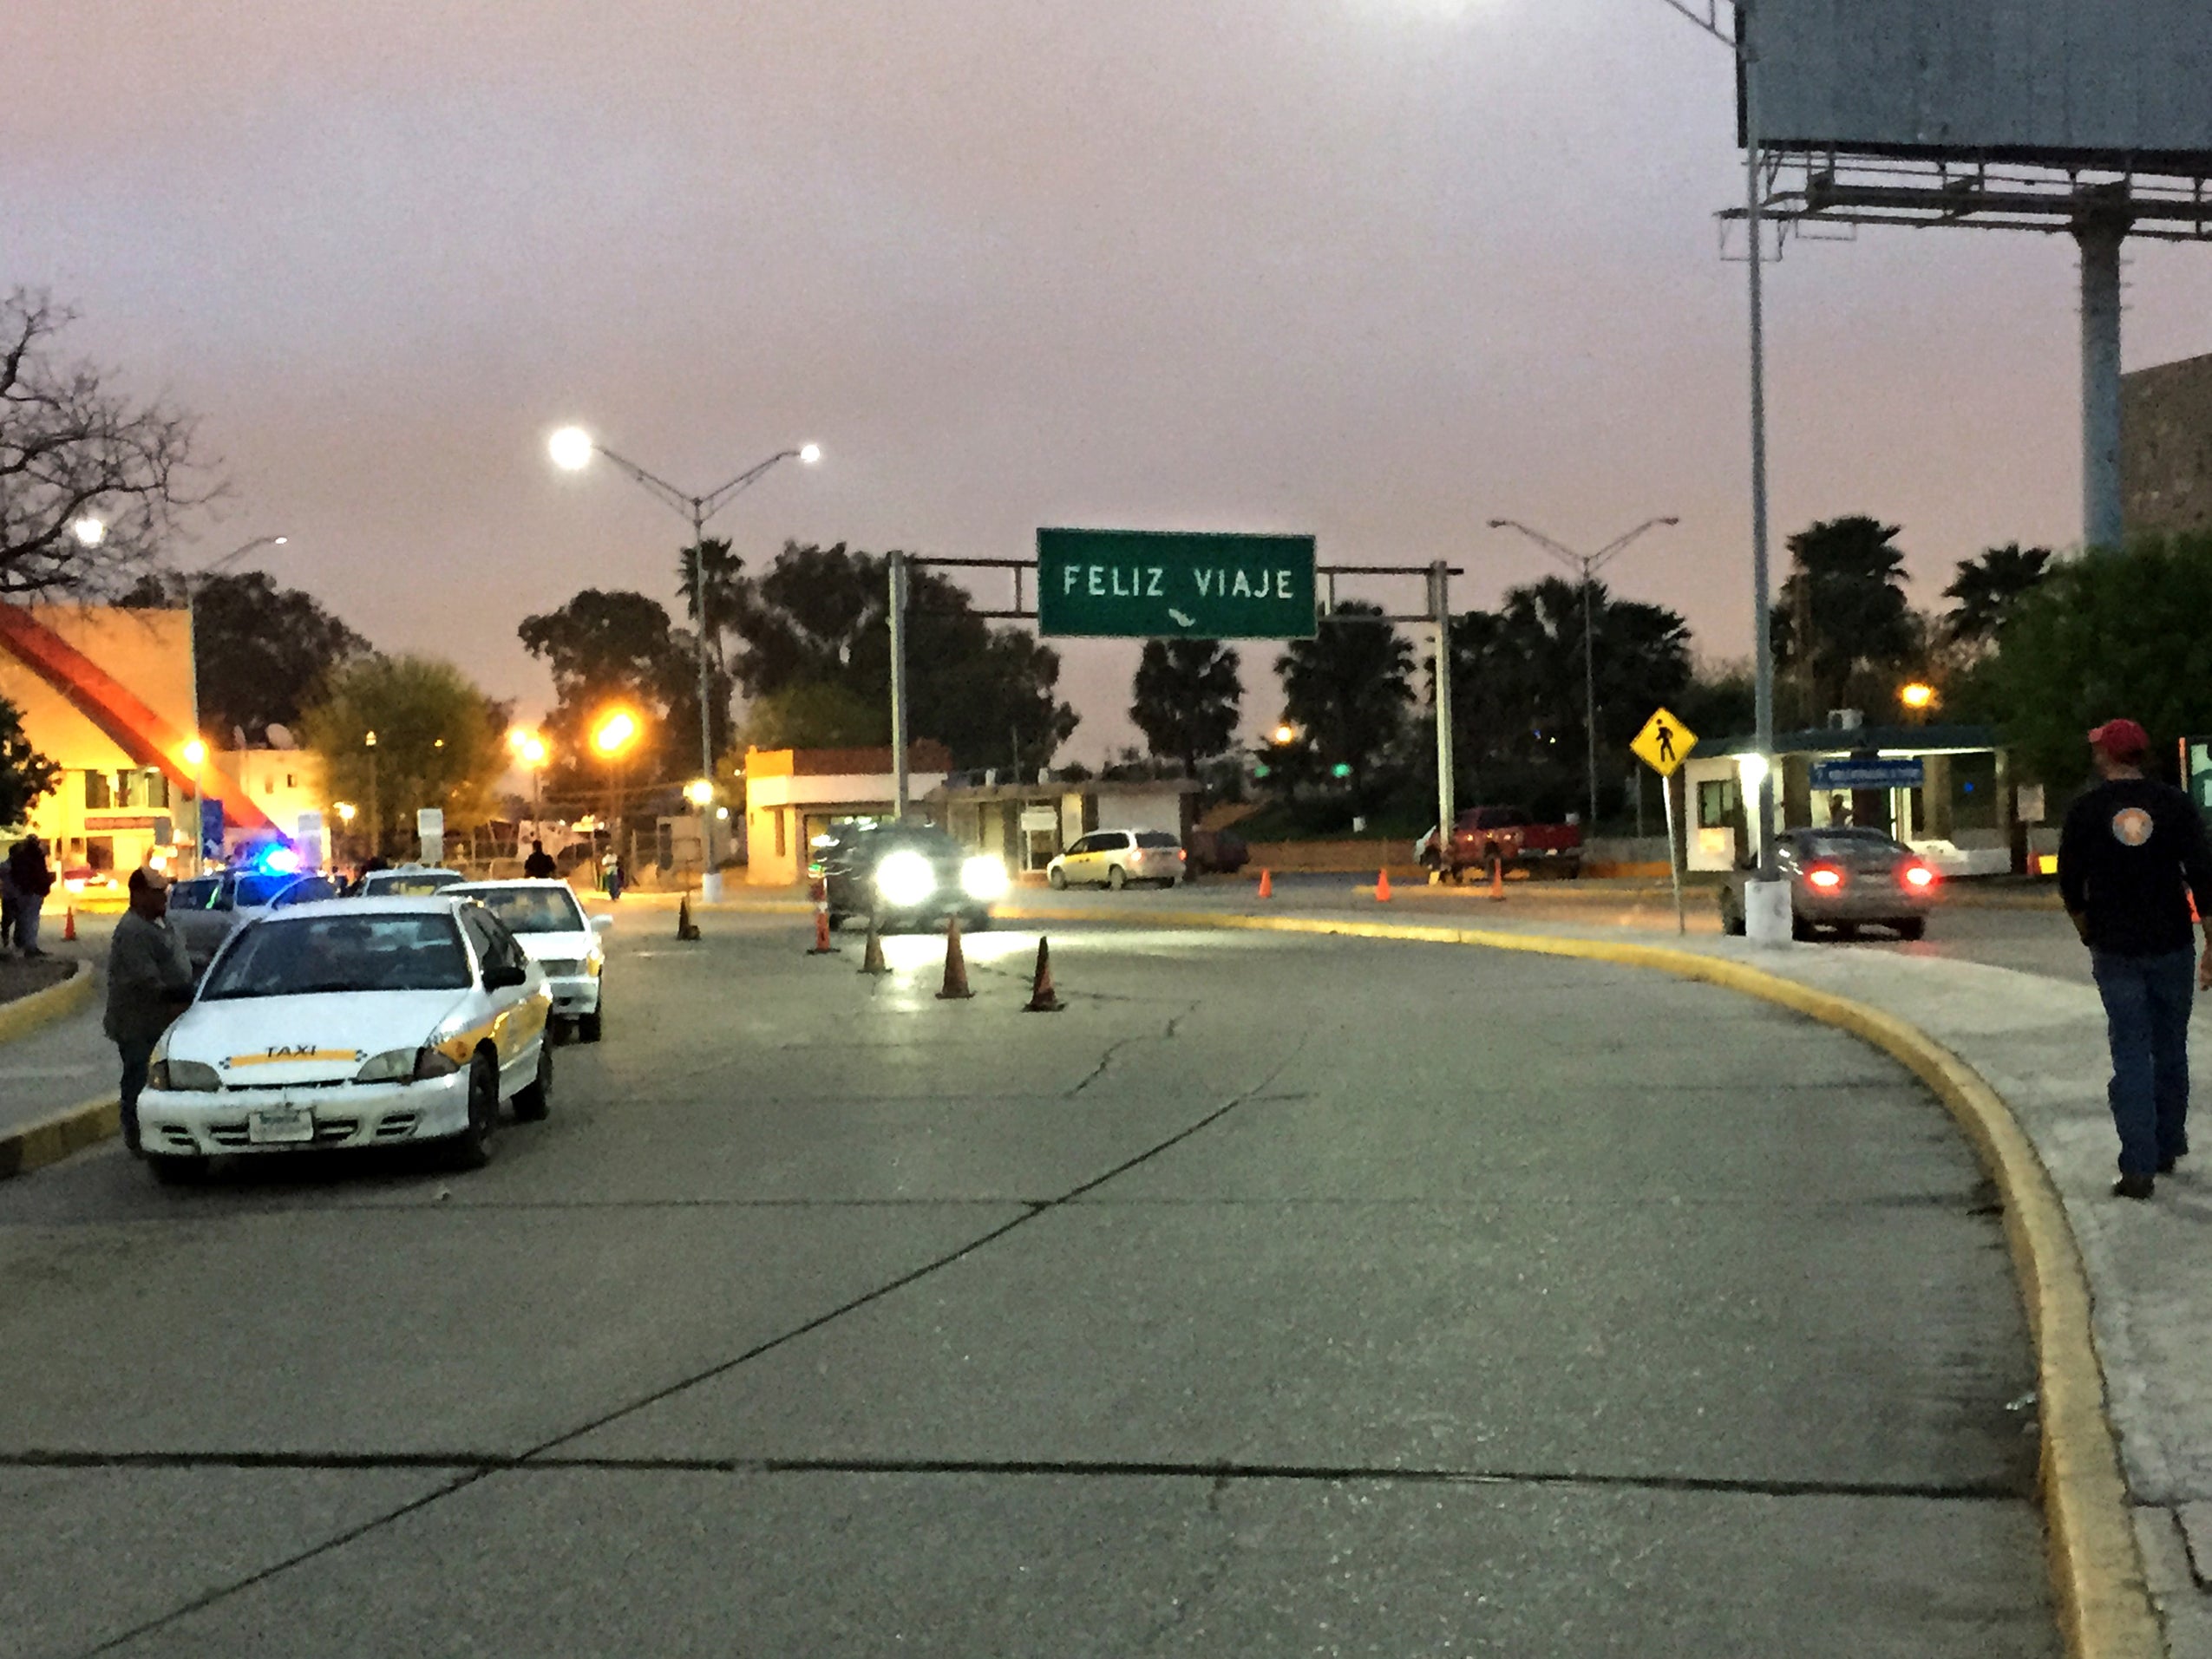 View from the street showing police pulled over and a street sign that says Feliz Viaje